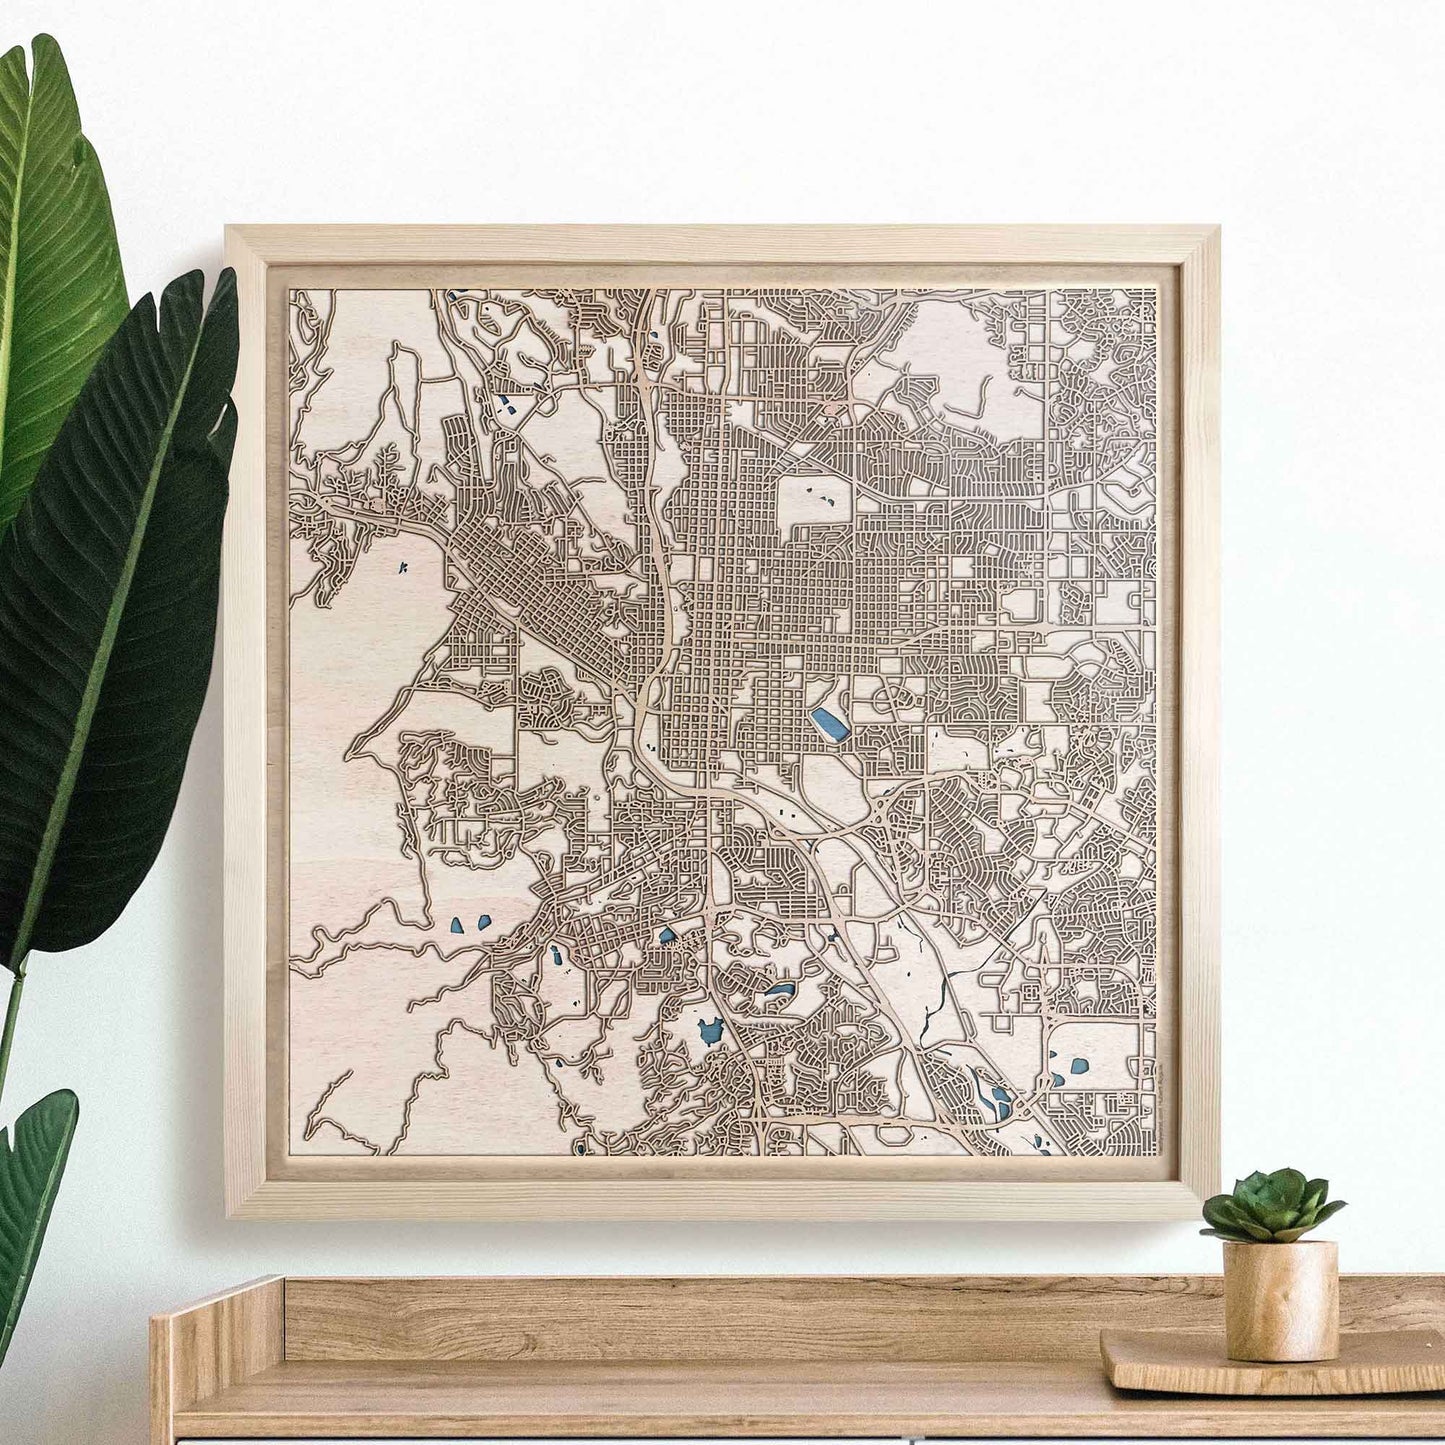 Colorado Springs Wooden Map by CityWood - Custom Wood Map Art - Unique Laser Cut Engraved - Anniversary Gift